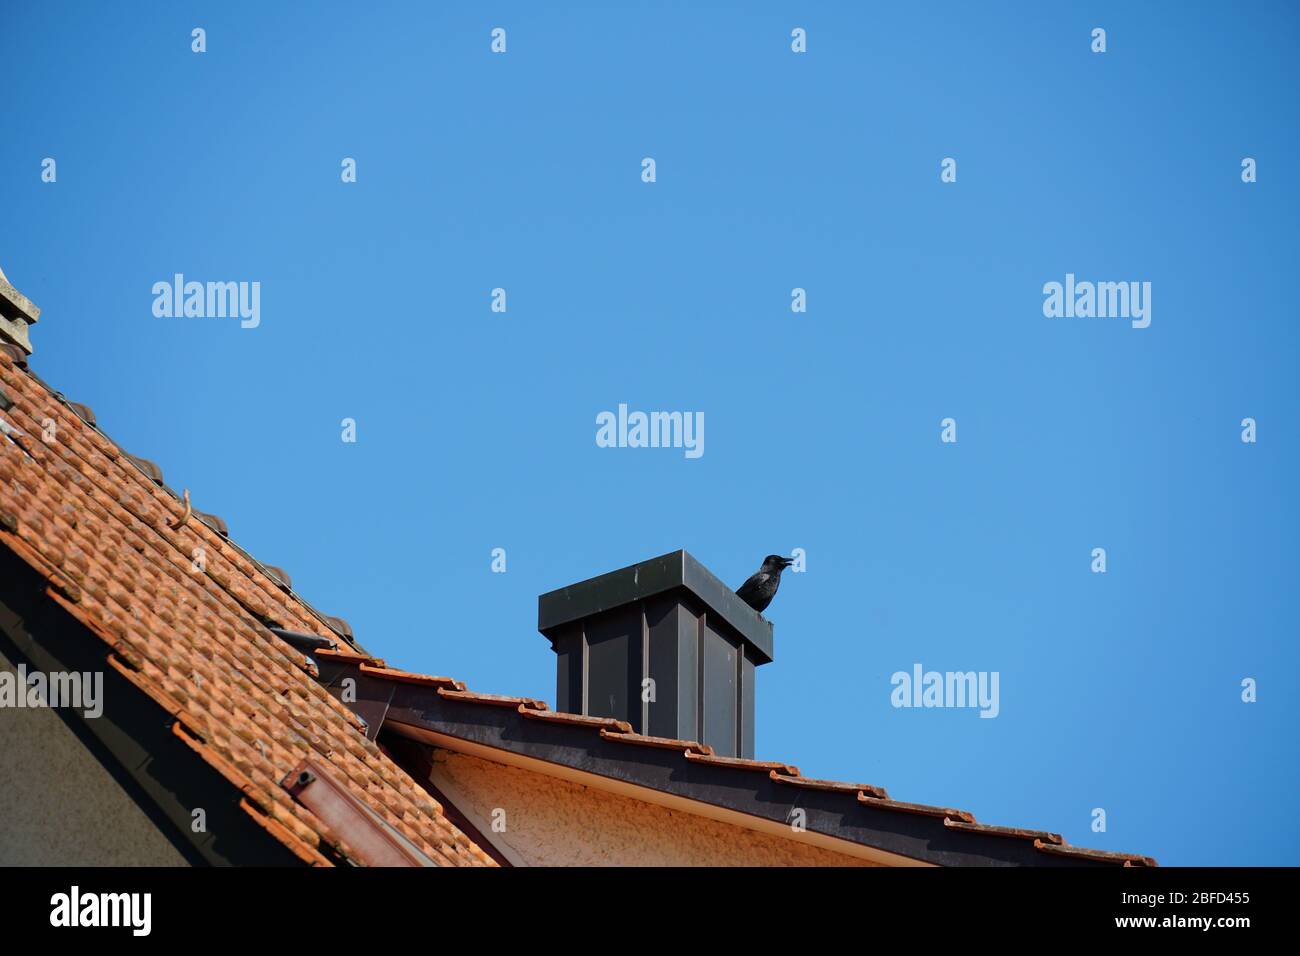 a raven in profile sitting on a chimney on a red clay tile roof on a clear spring day, with blue sky in the background in Urdorf, Switzerland Stock Photo